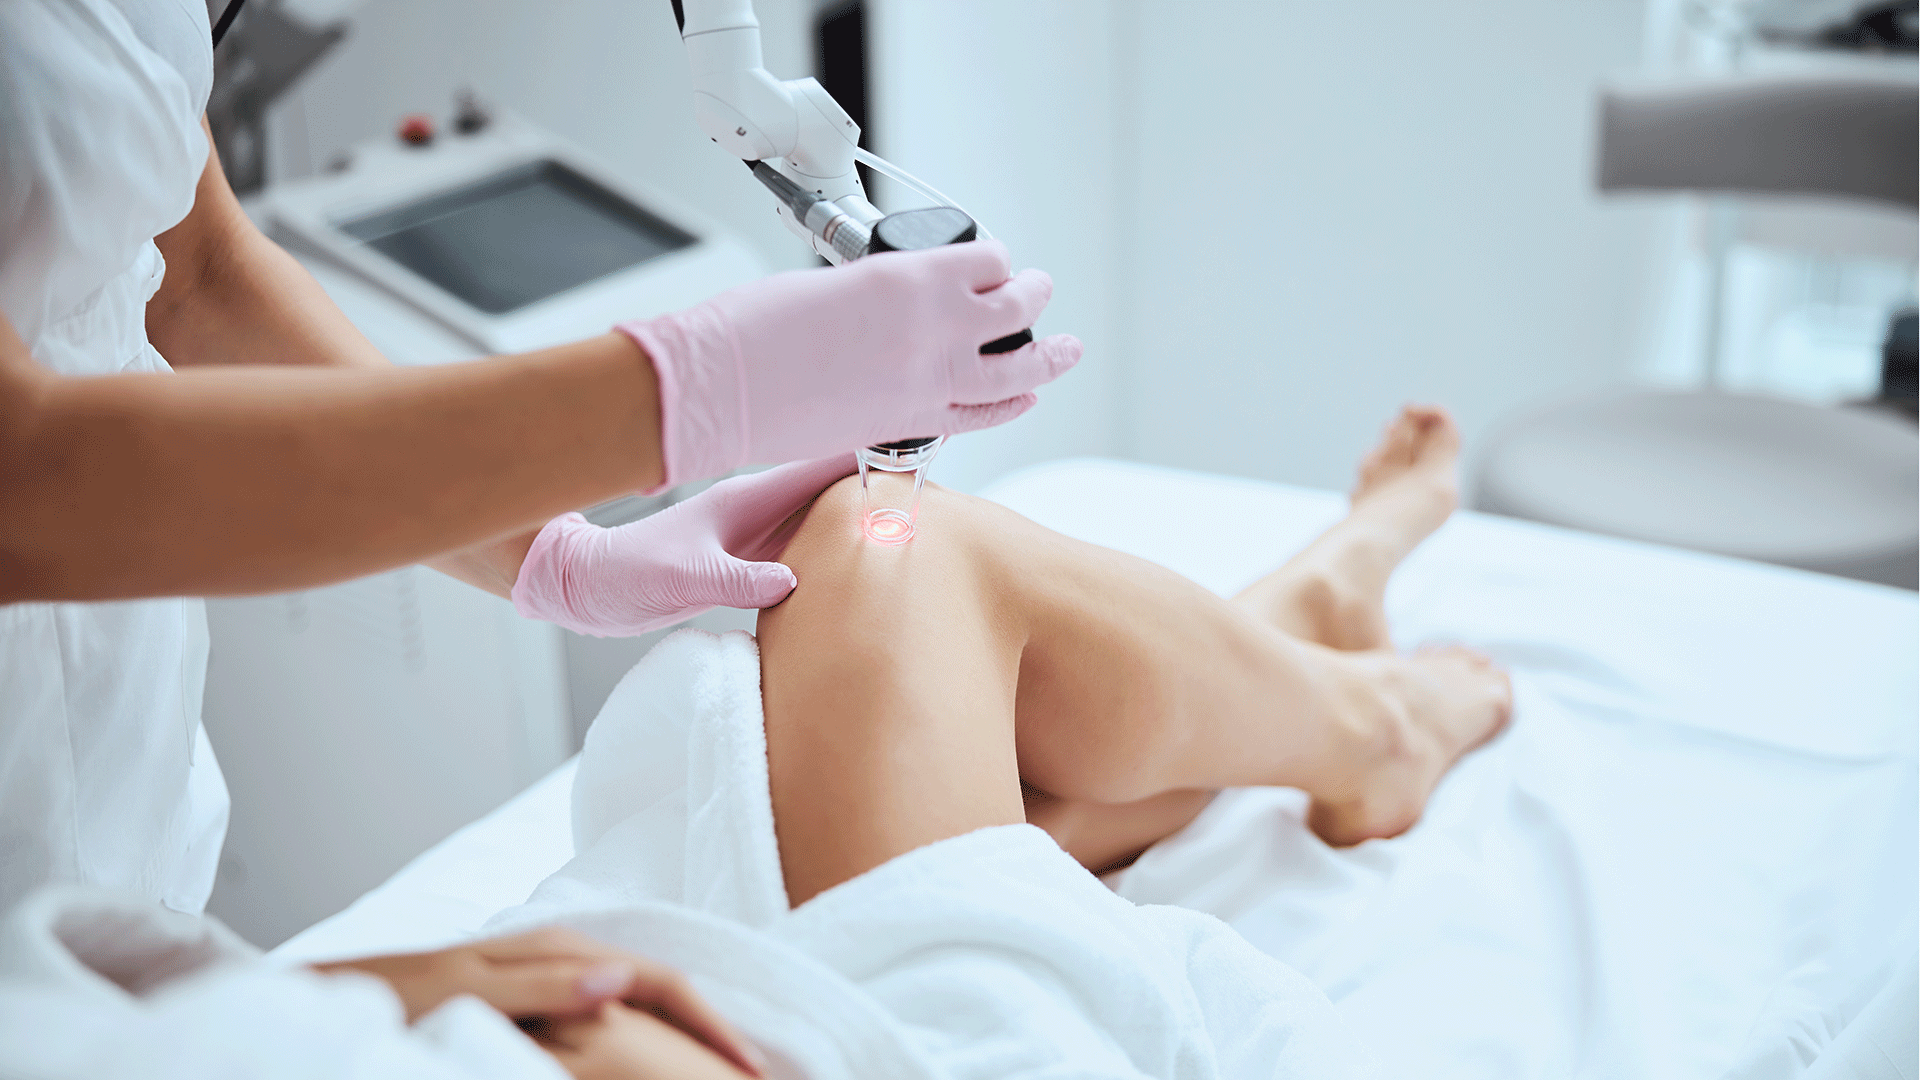 Vein and Cosmetic Center Gets a Lift from Google Ads